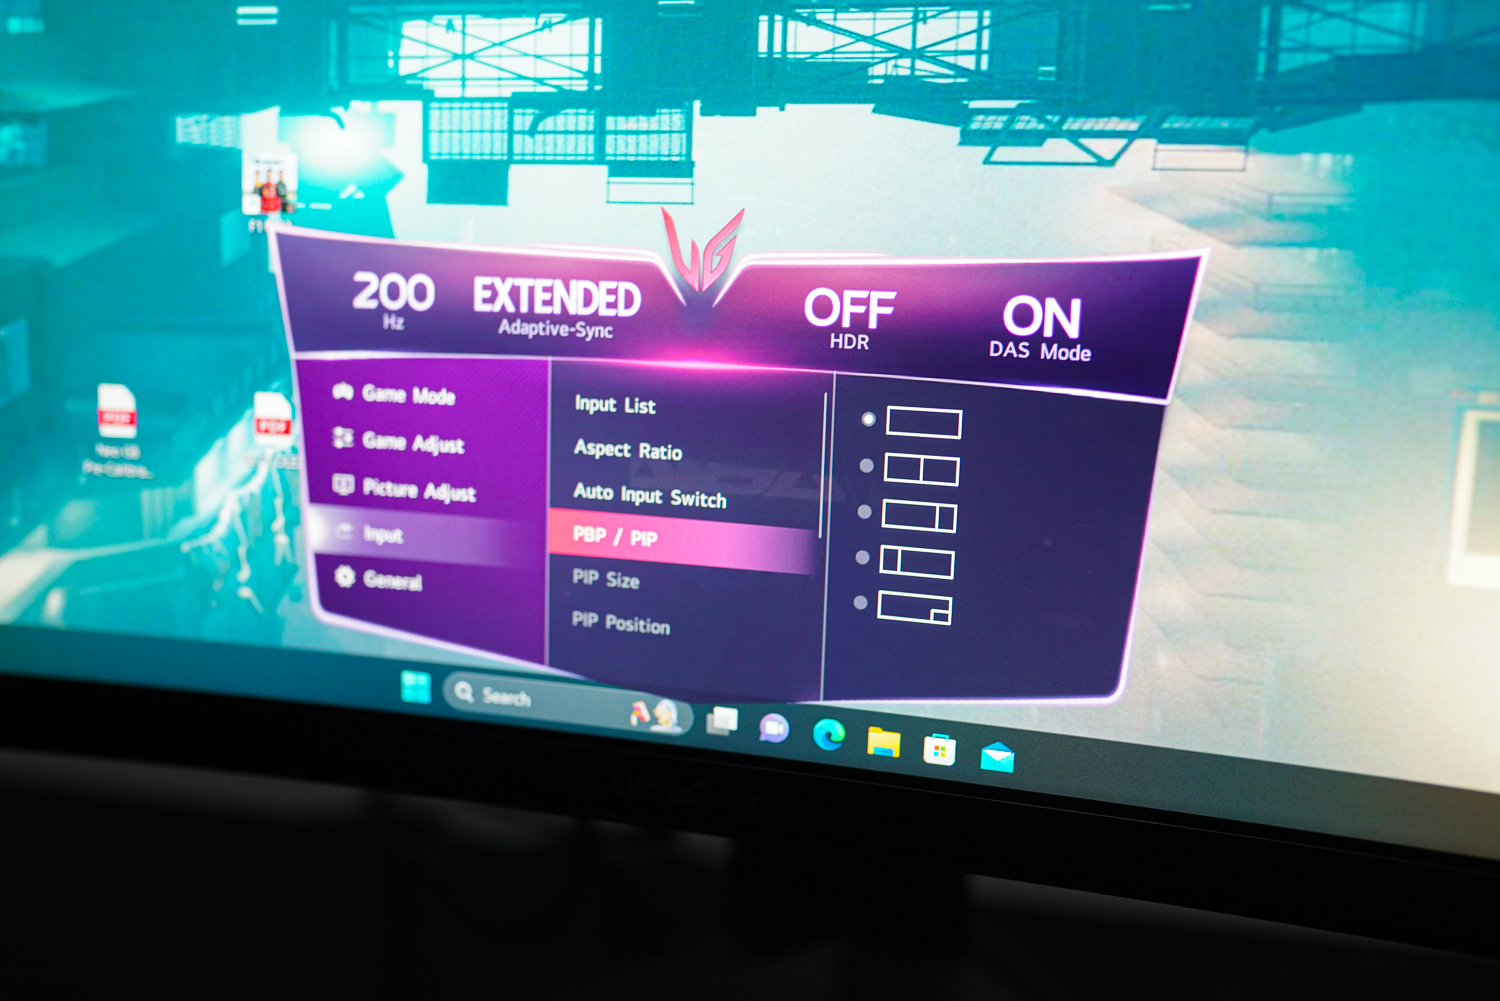 Picture-in-picture modes on the LG UltraGear 45 gaming monitor.